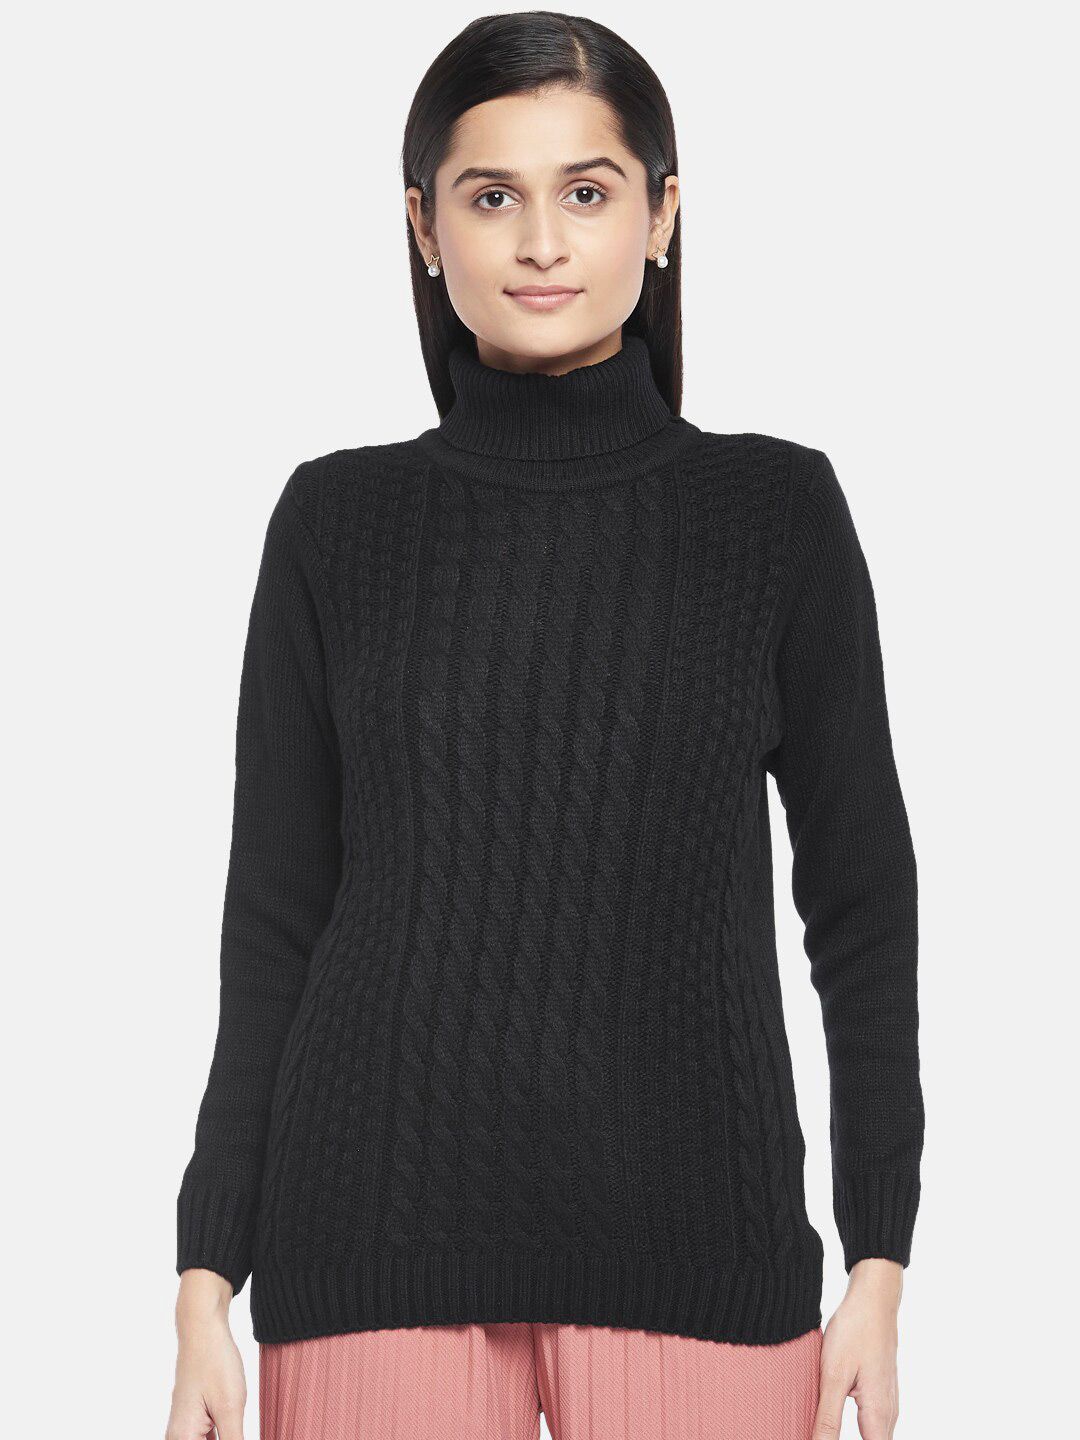 Honey by Pantaloons Women Black Cable Knit Acrylic Pullover Price in India